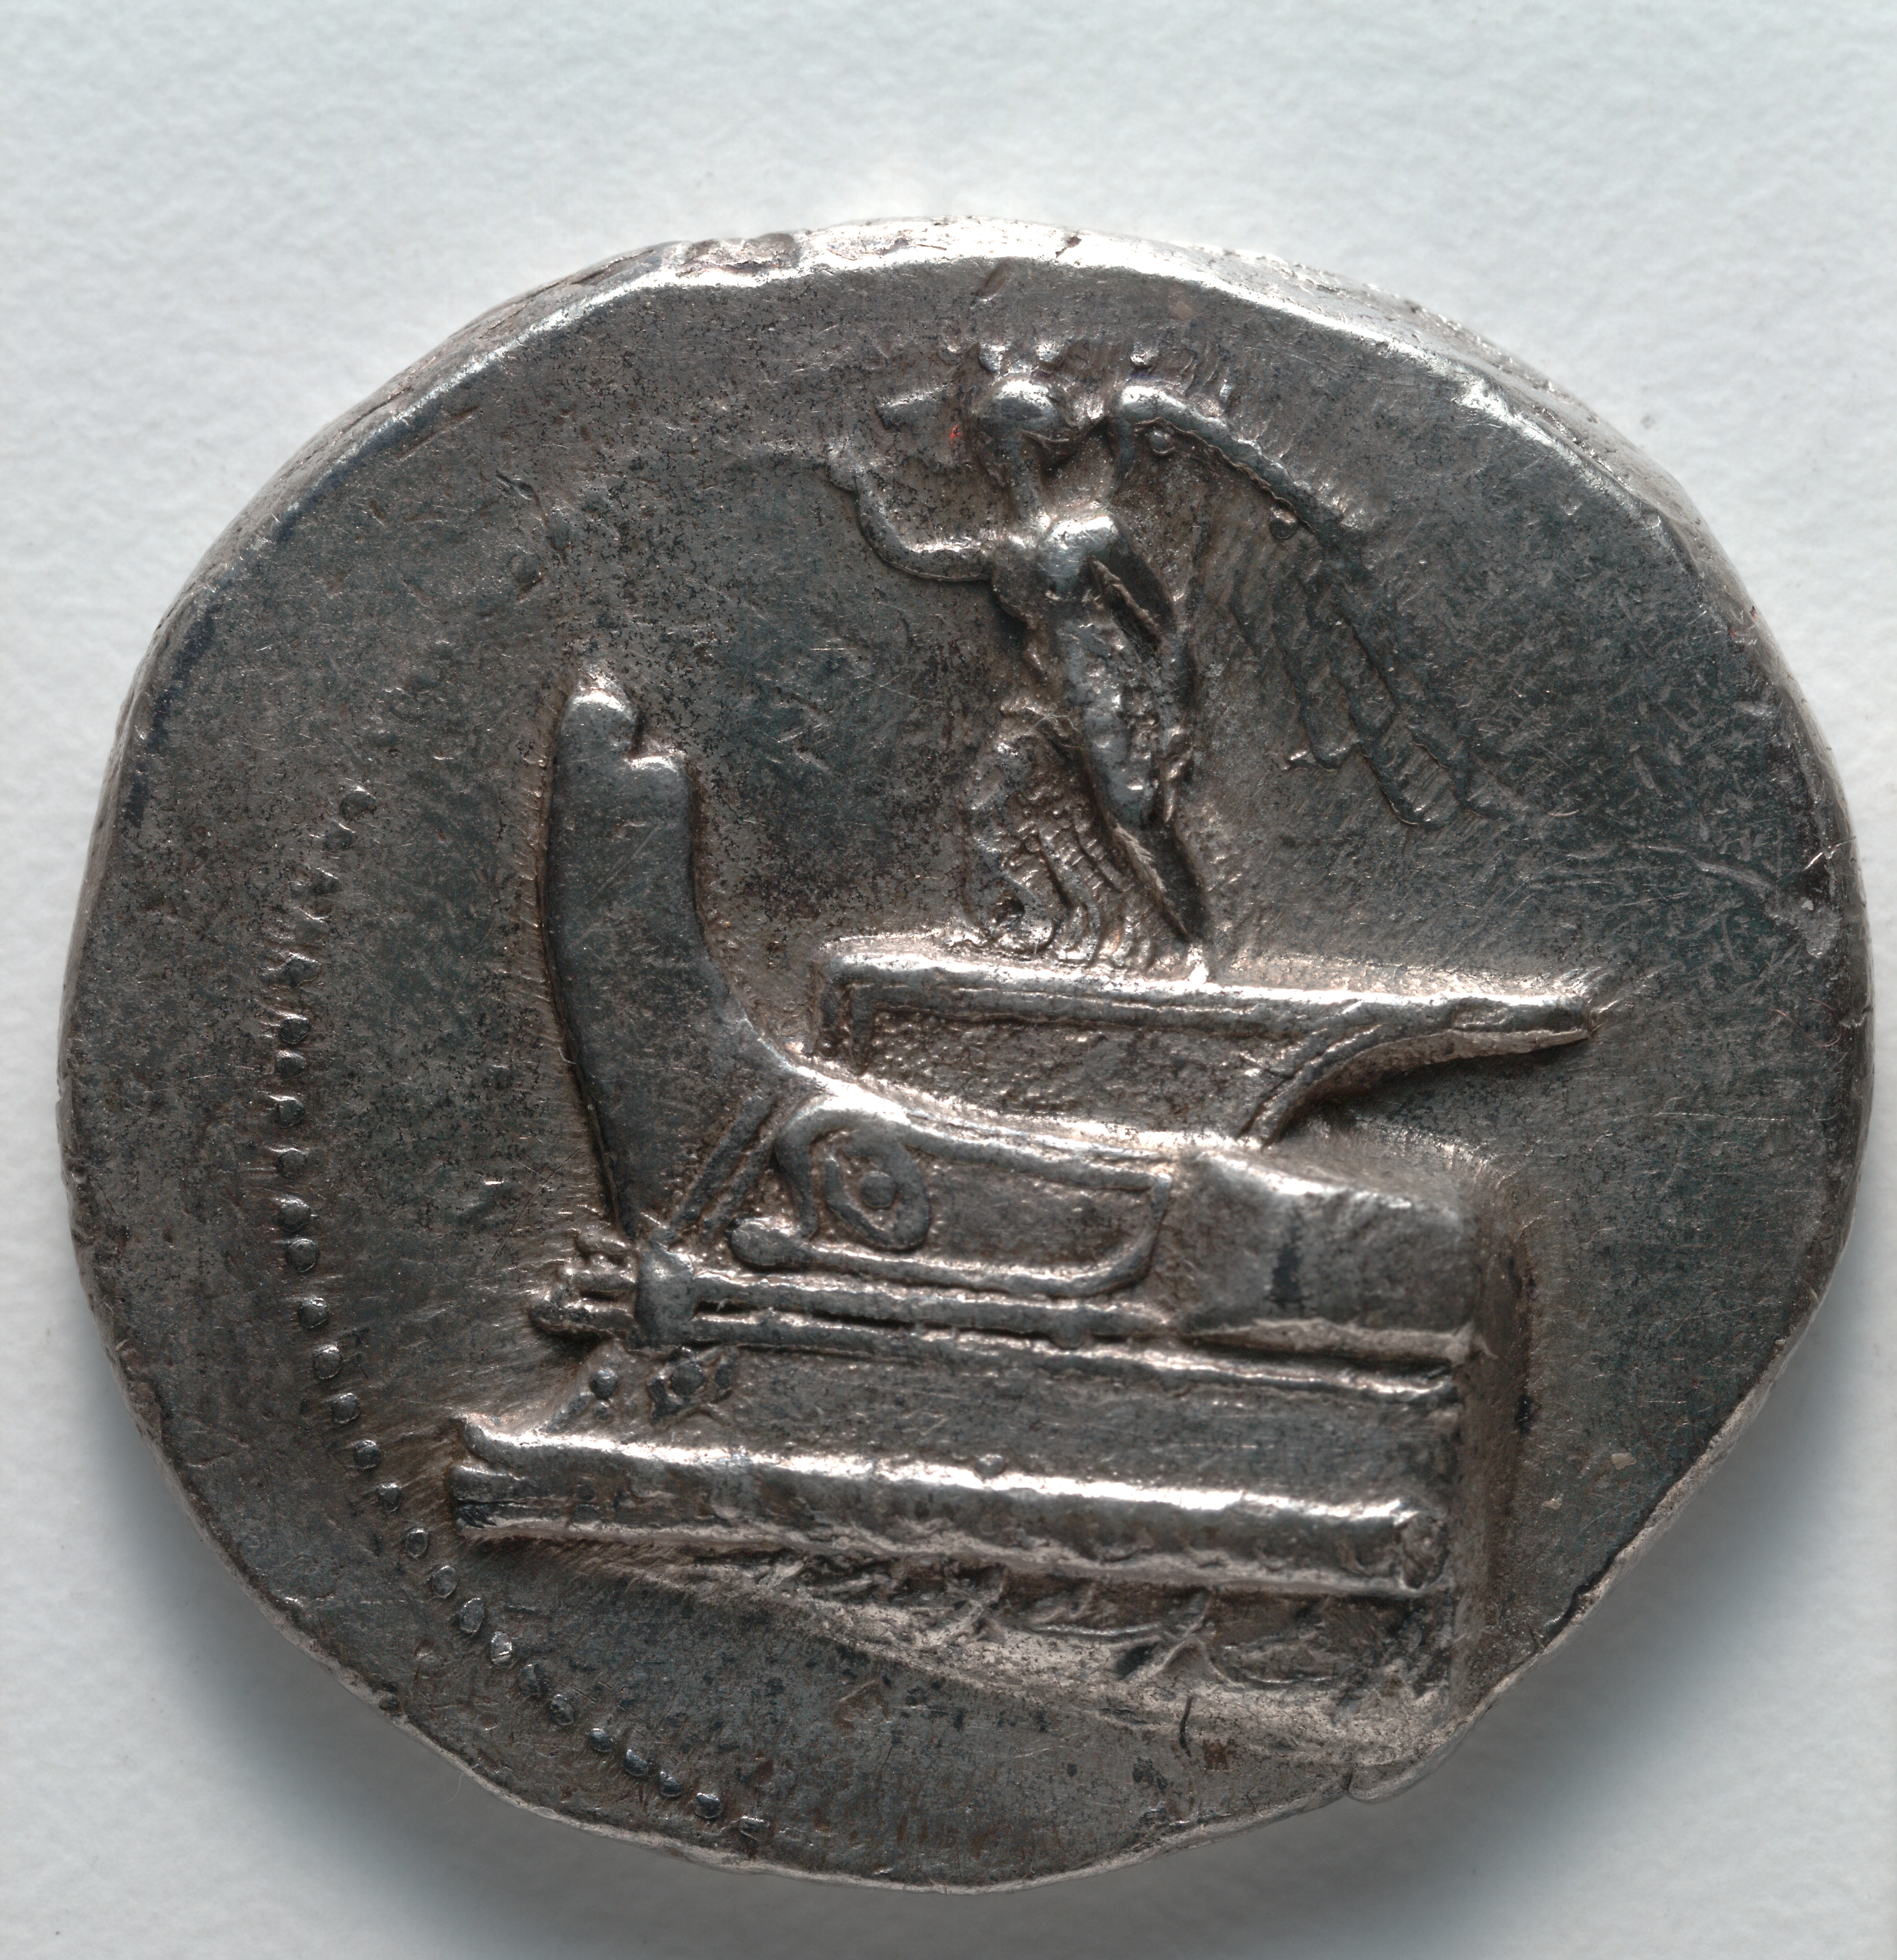 Tetradrachm: Nike on Ship's Prow, Blowing Trumpet (obverse)